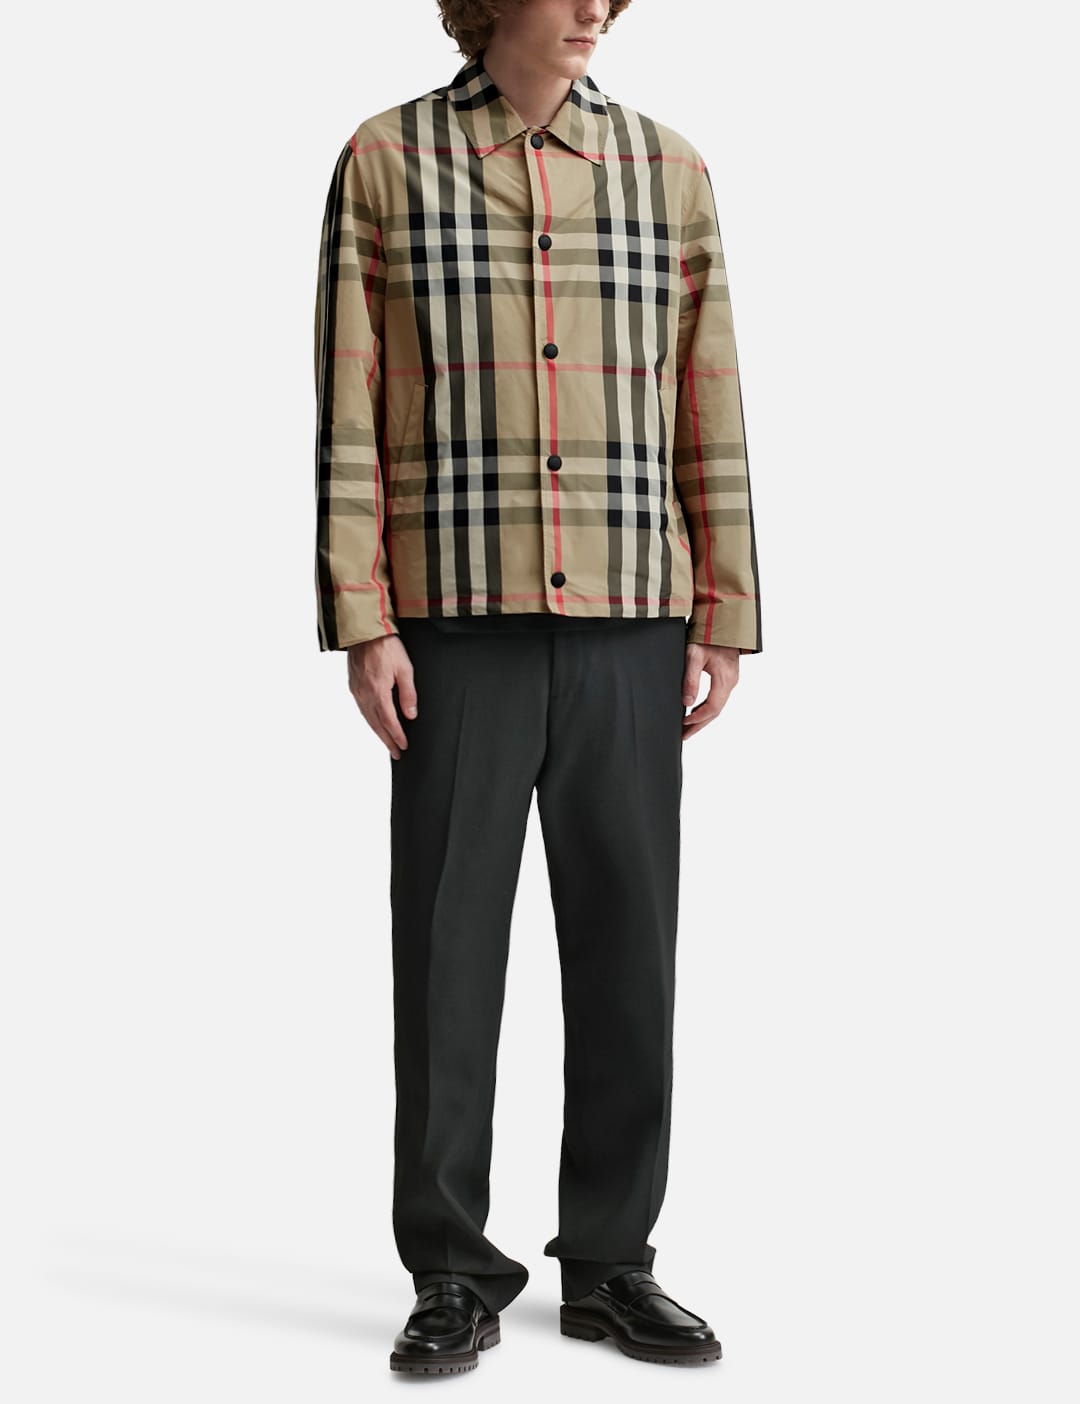 Burberry - Check Nylon Jacket | HBX - Globally Curated Fashion and